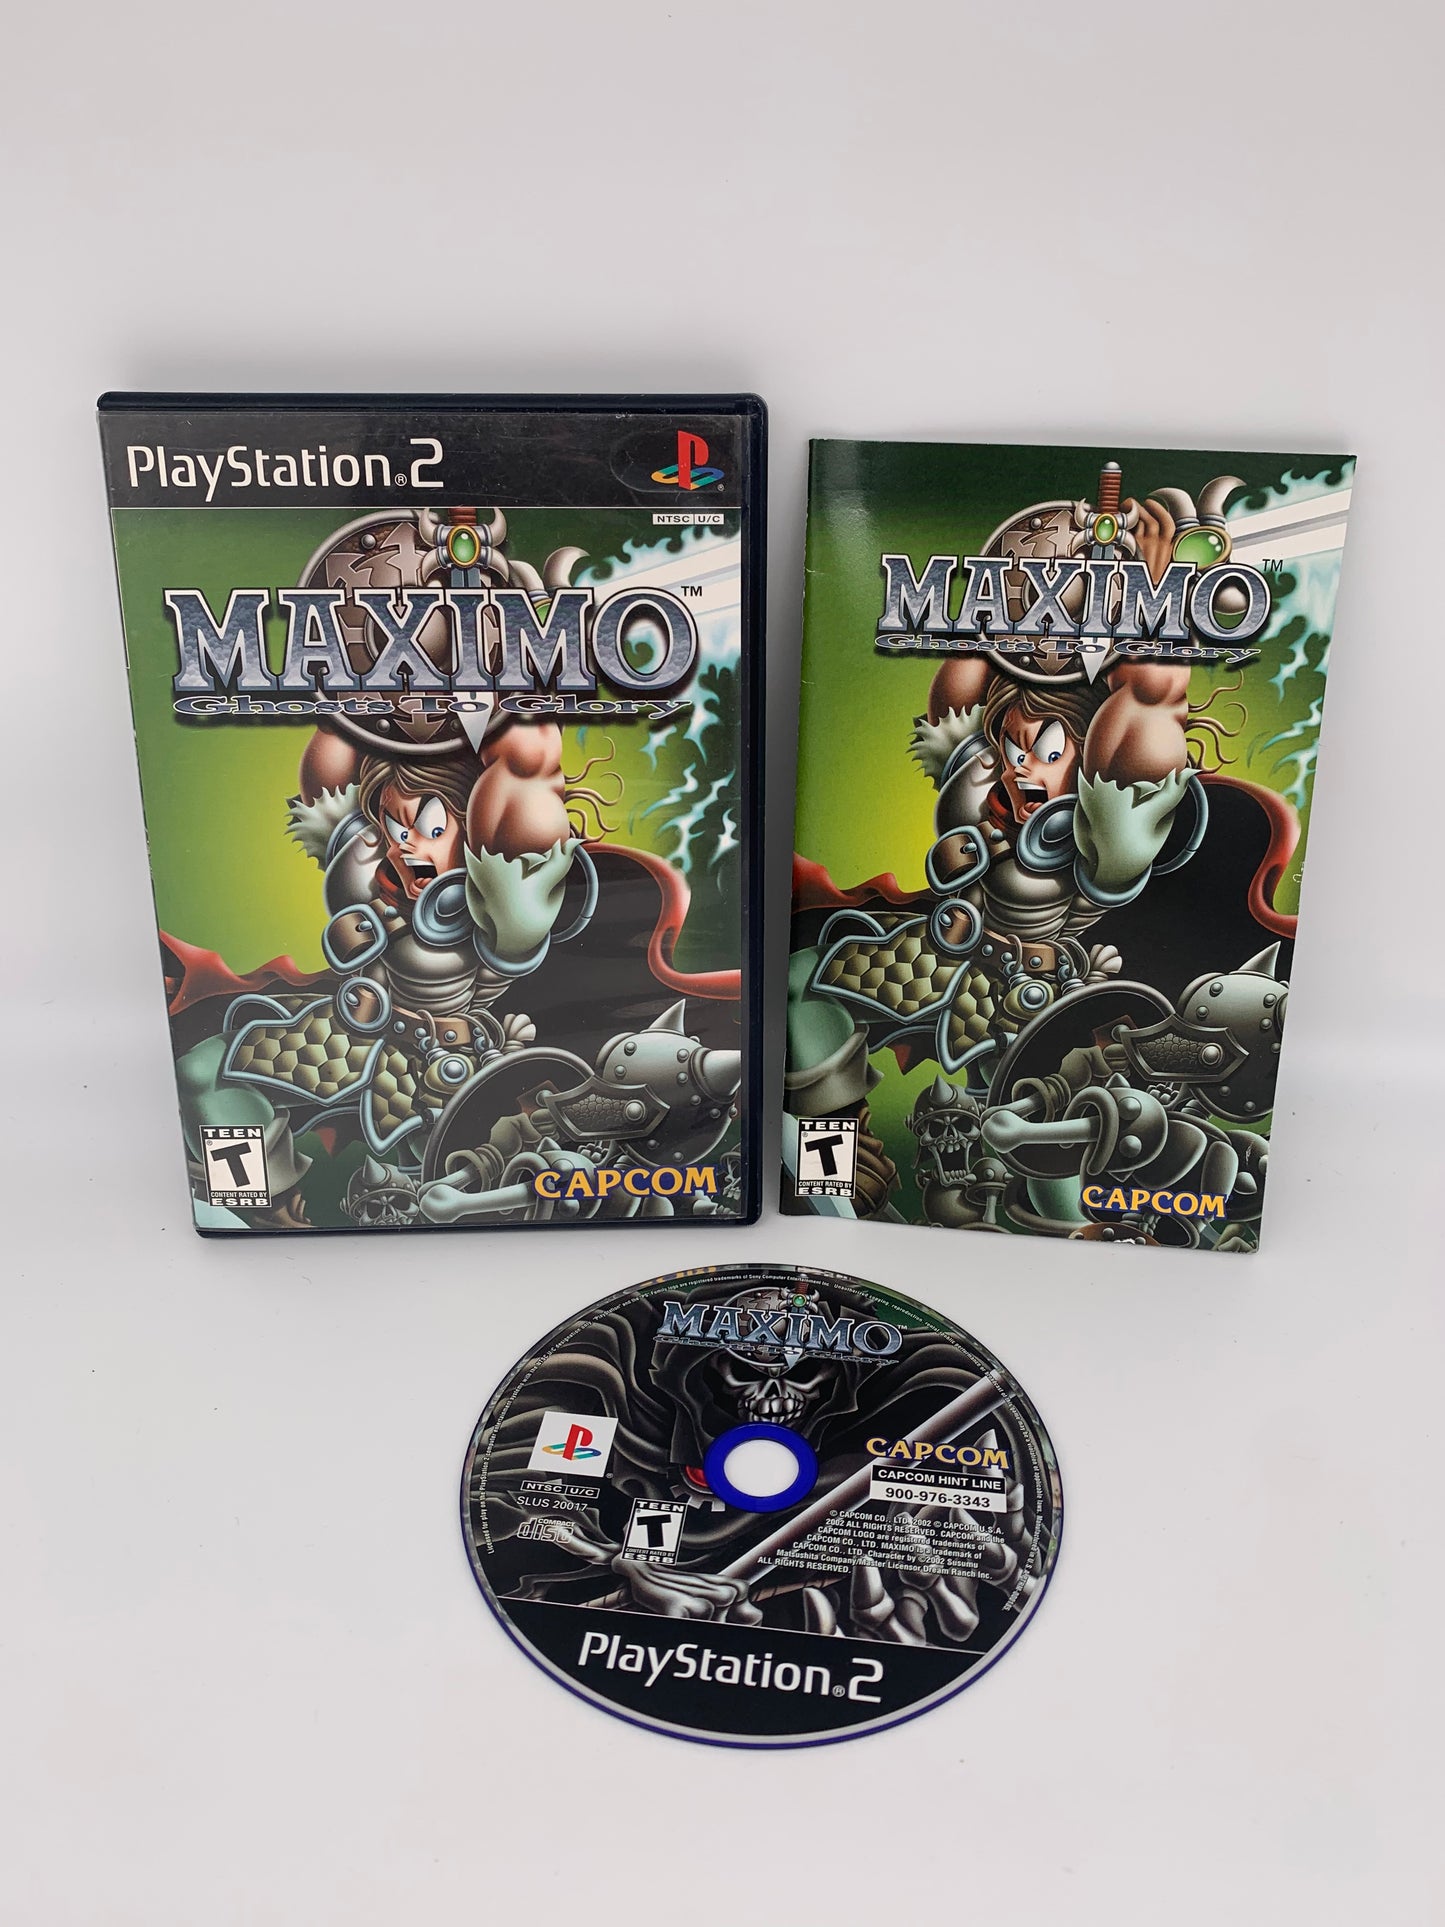 PiXEL-RETRO.COM : SONY PLAYSTATION 2 (PS2) COMPLET CIB BOX MANUAL GAME NTSC MAXIMO GHOSTS TO GLORY